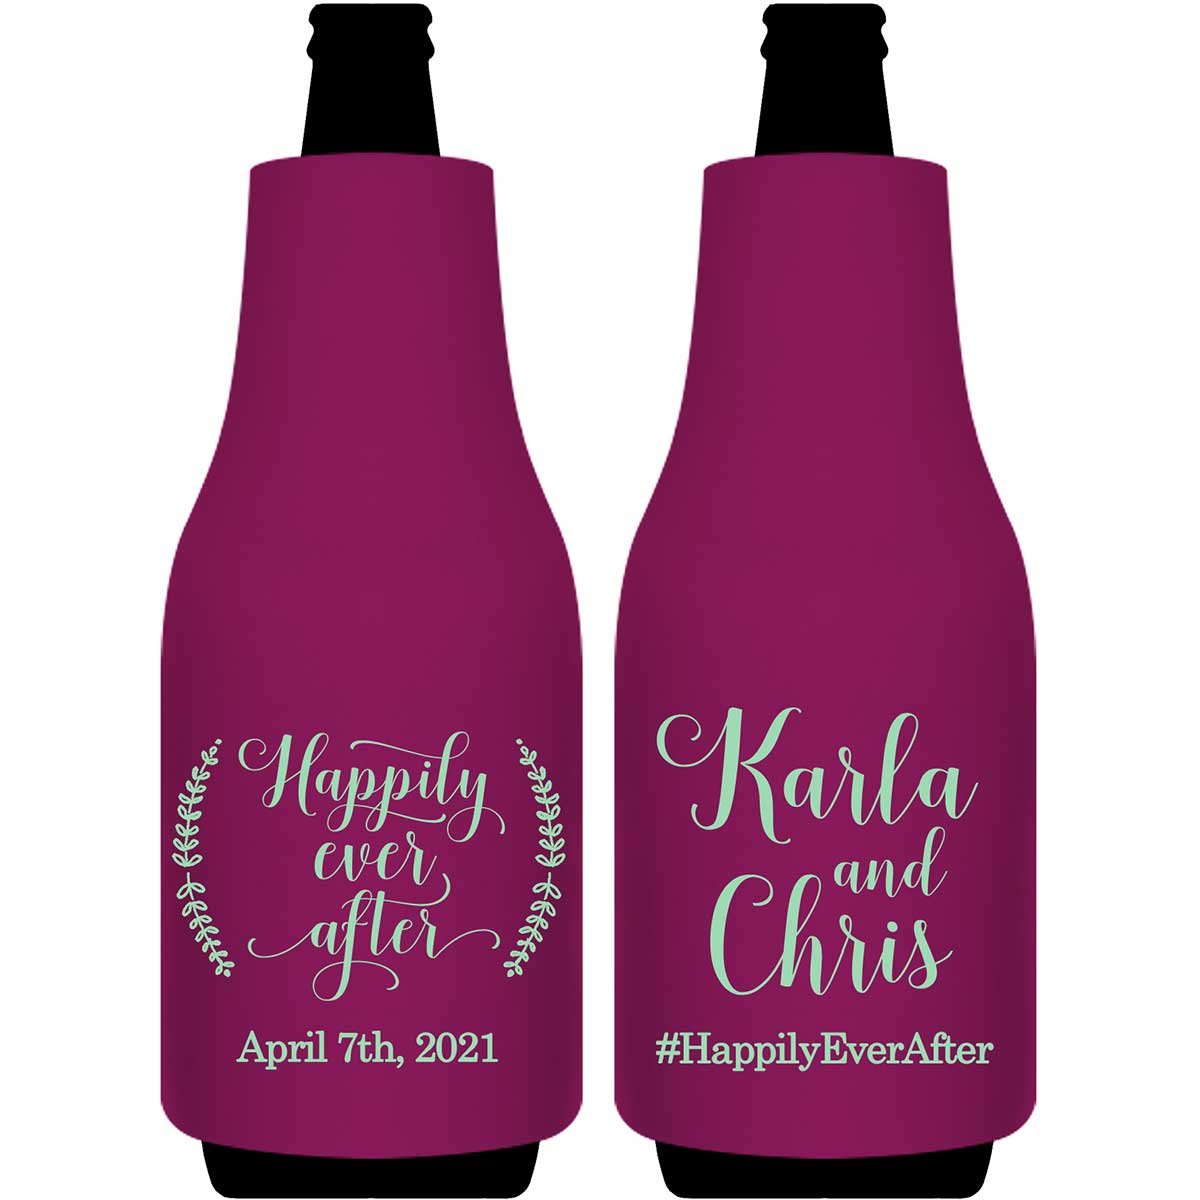 Happily Ever After 2A Foldable Bottle Sleeve Koozies Wedding Gifts for Guests